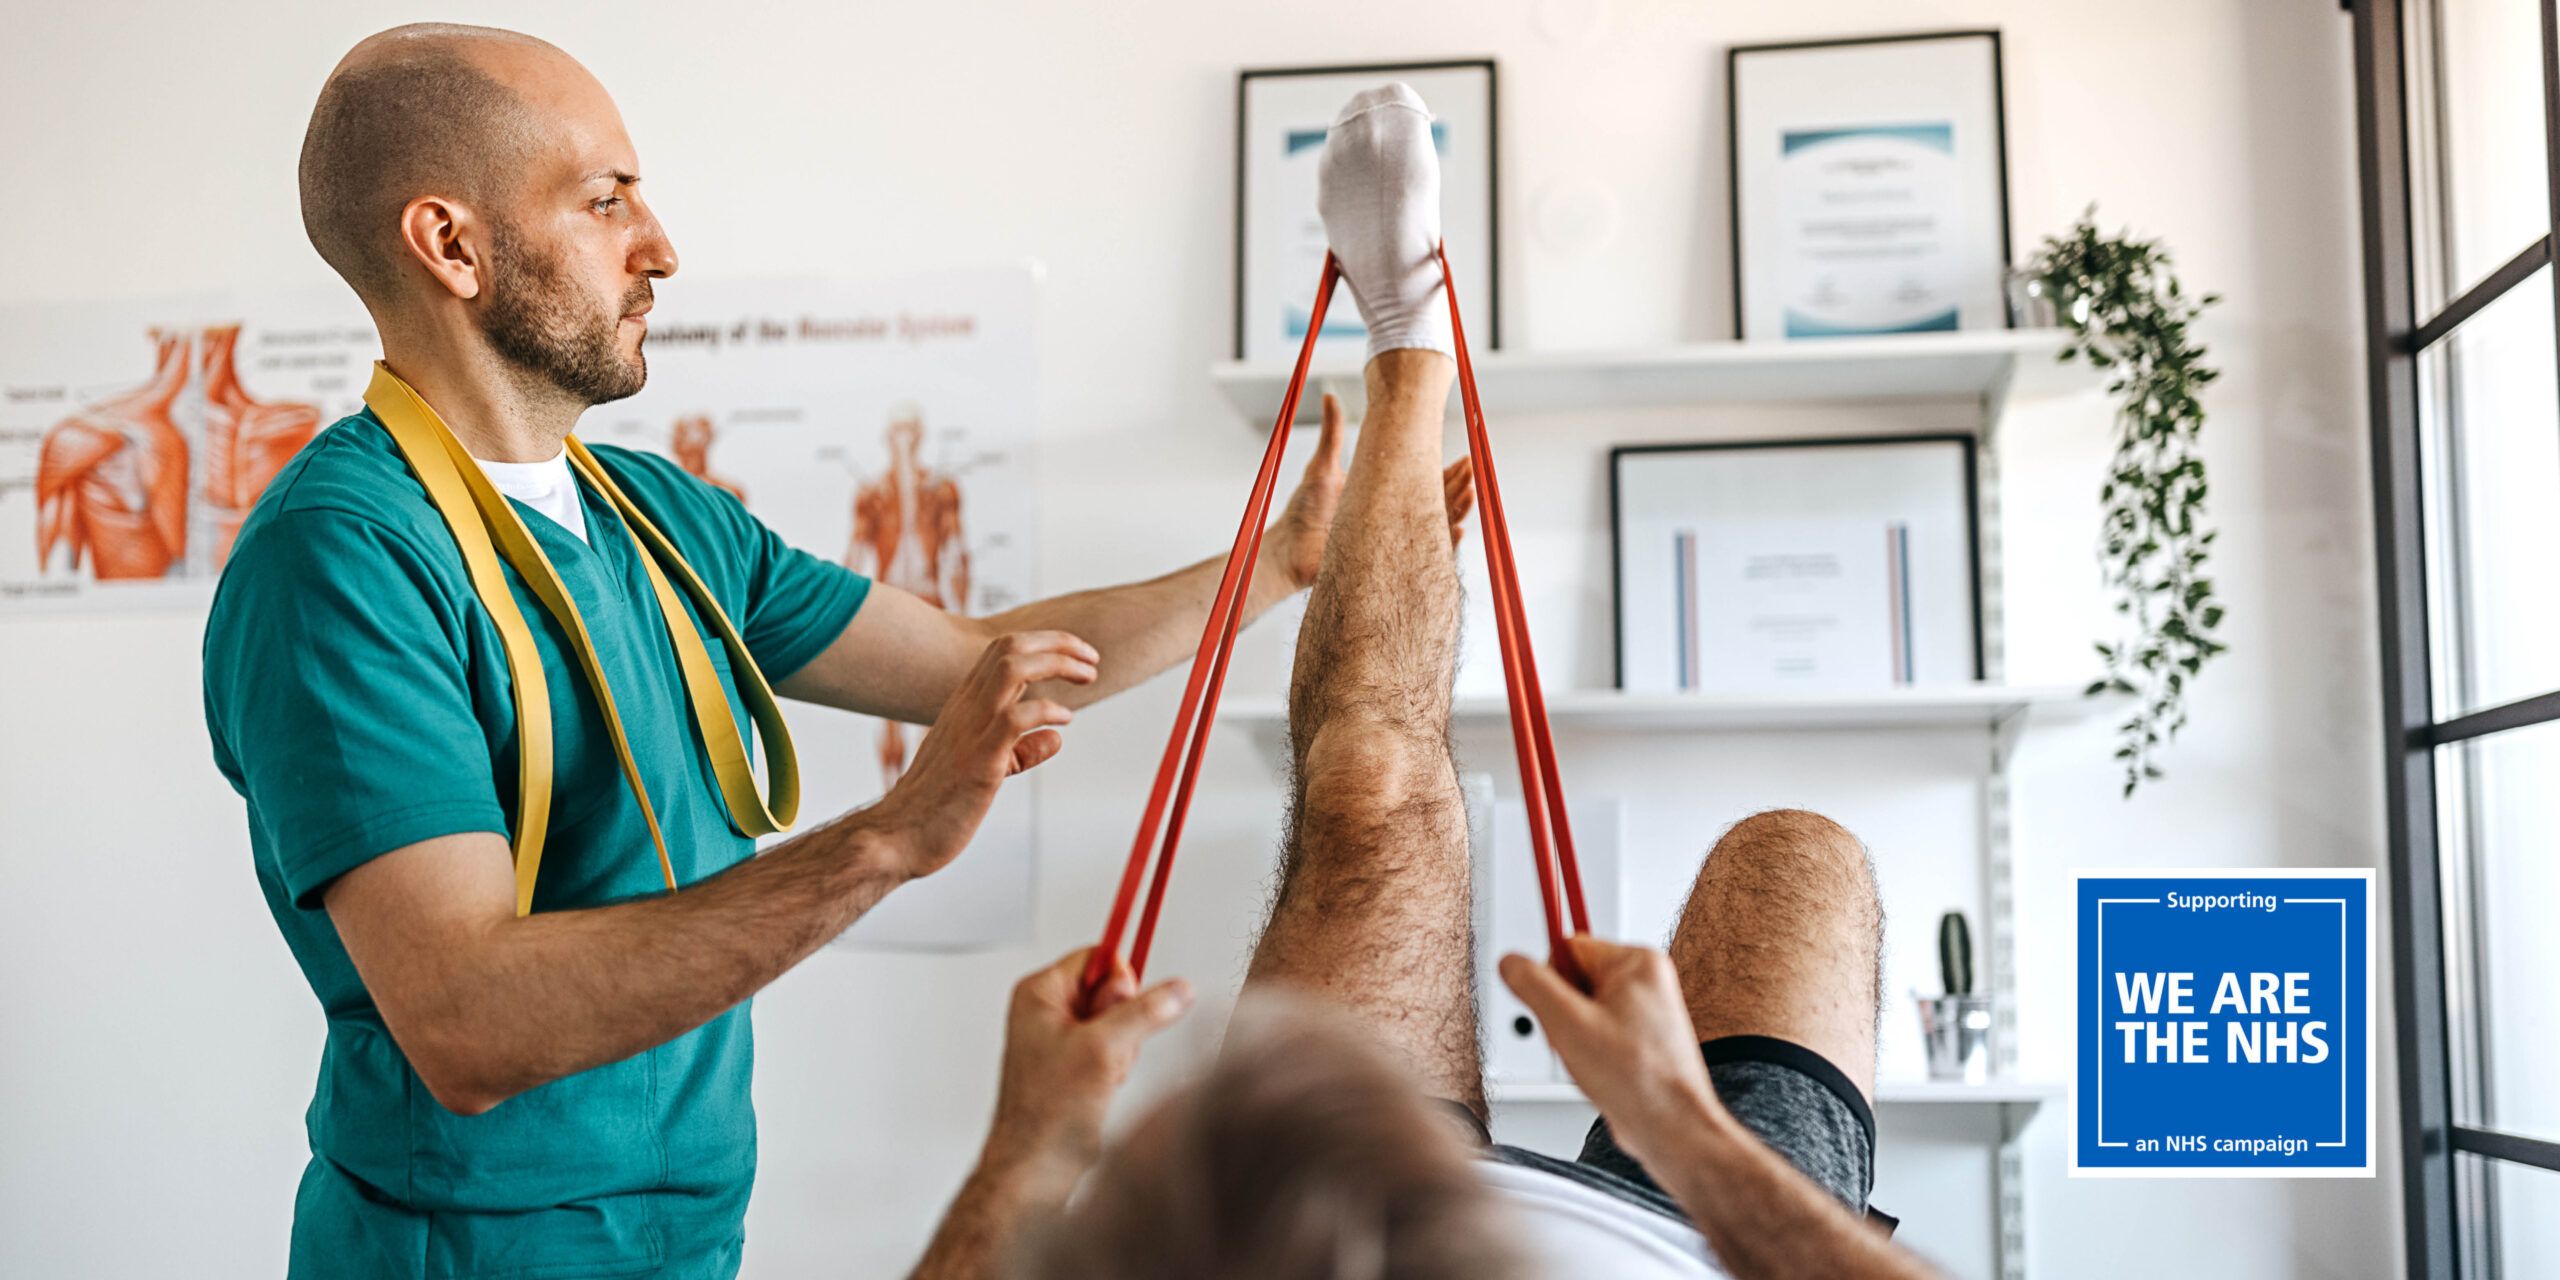 Physiotherapist courses: Learn about physiotherapy - FutureLearn